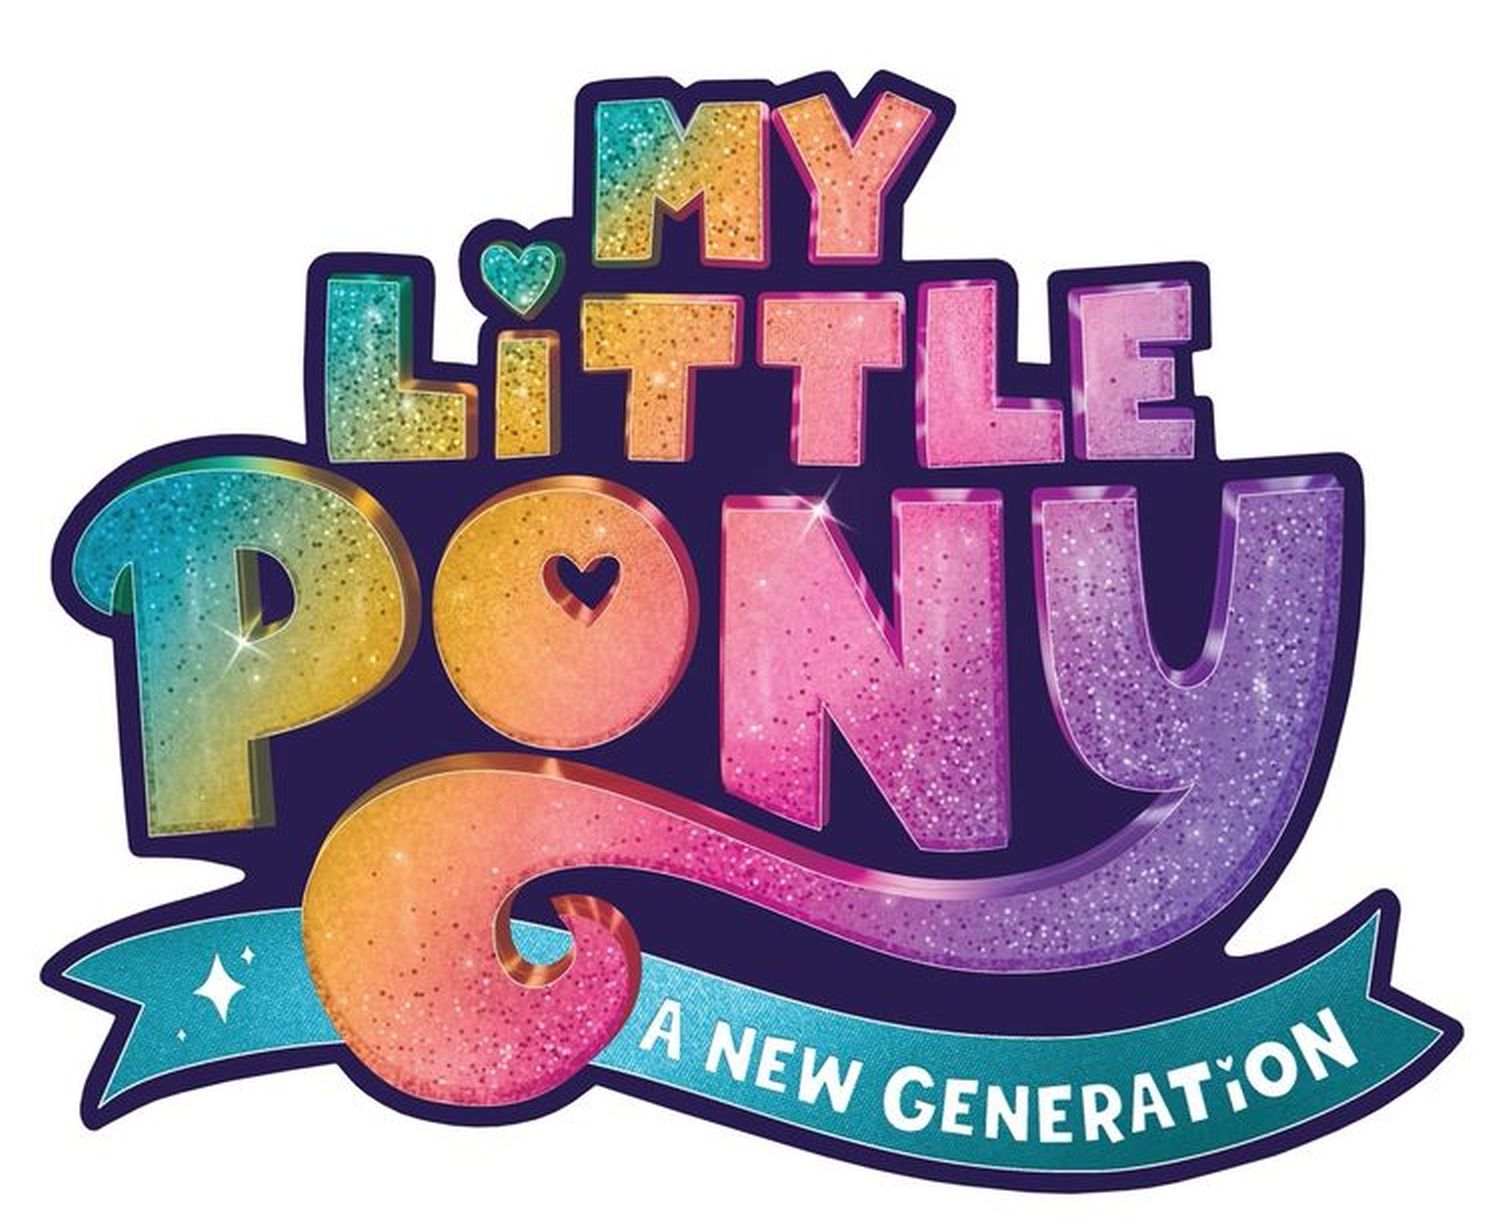 My Little Pony: A New Generation Meet The Ponies